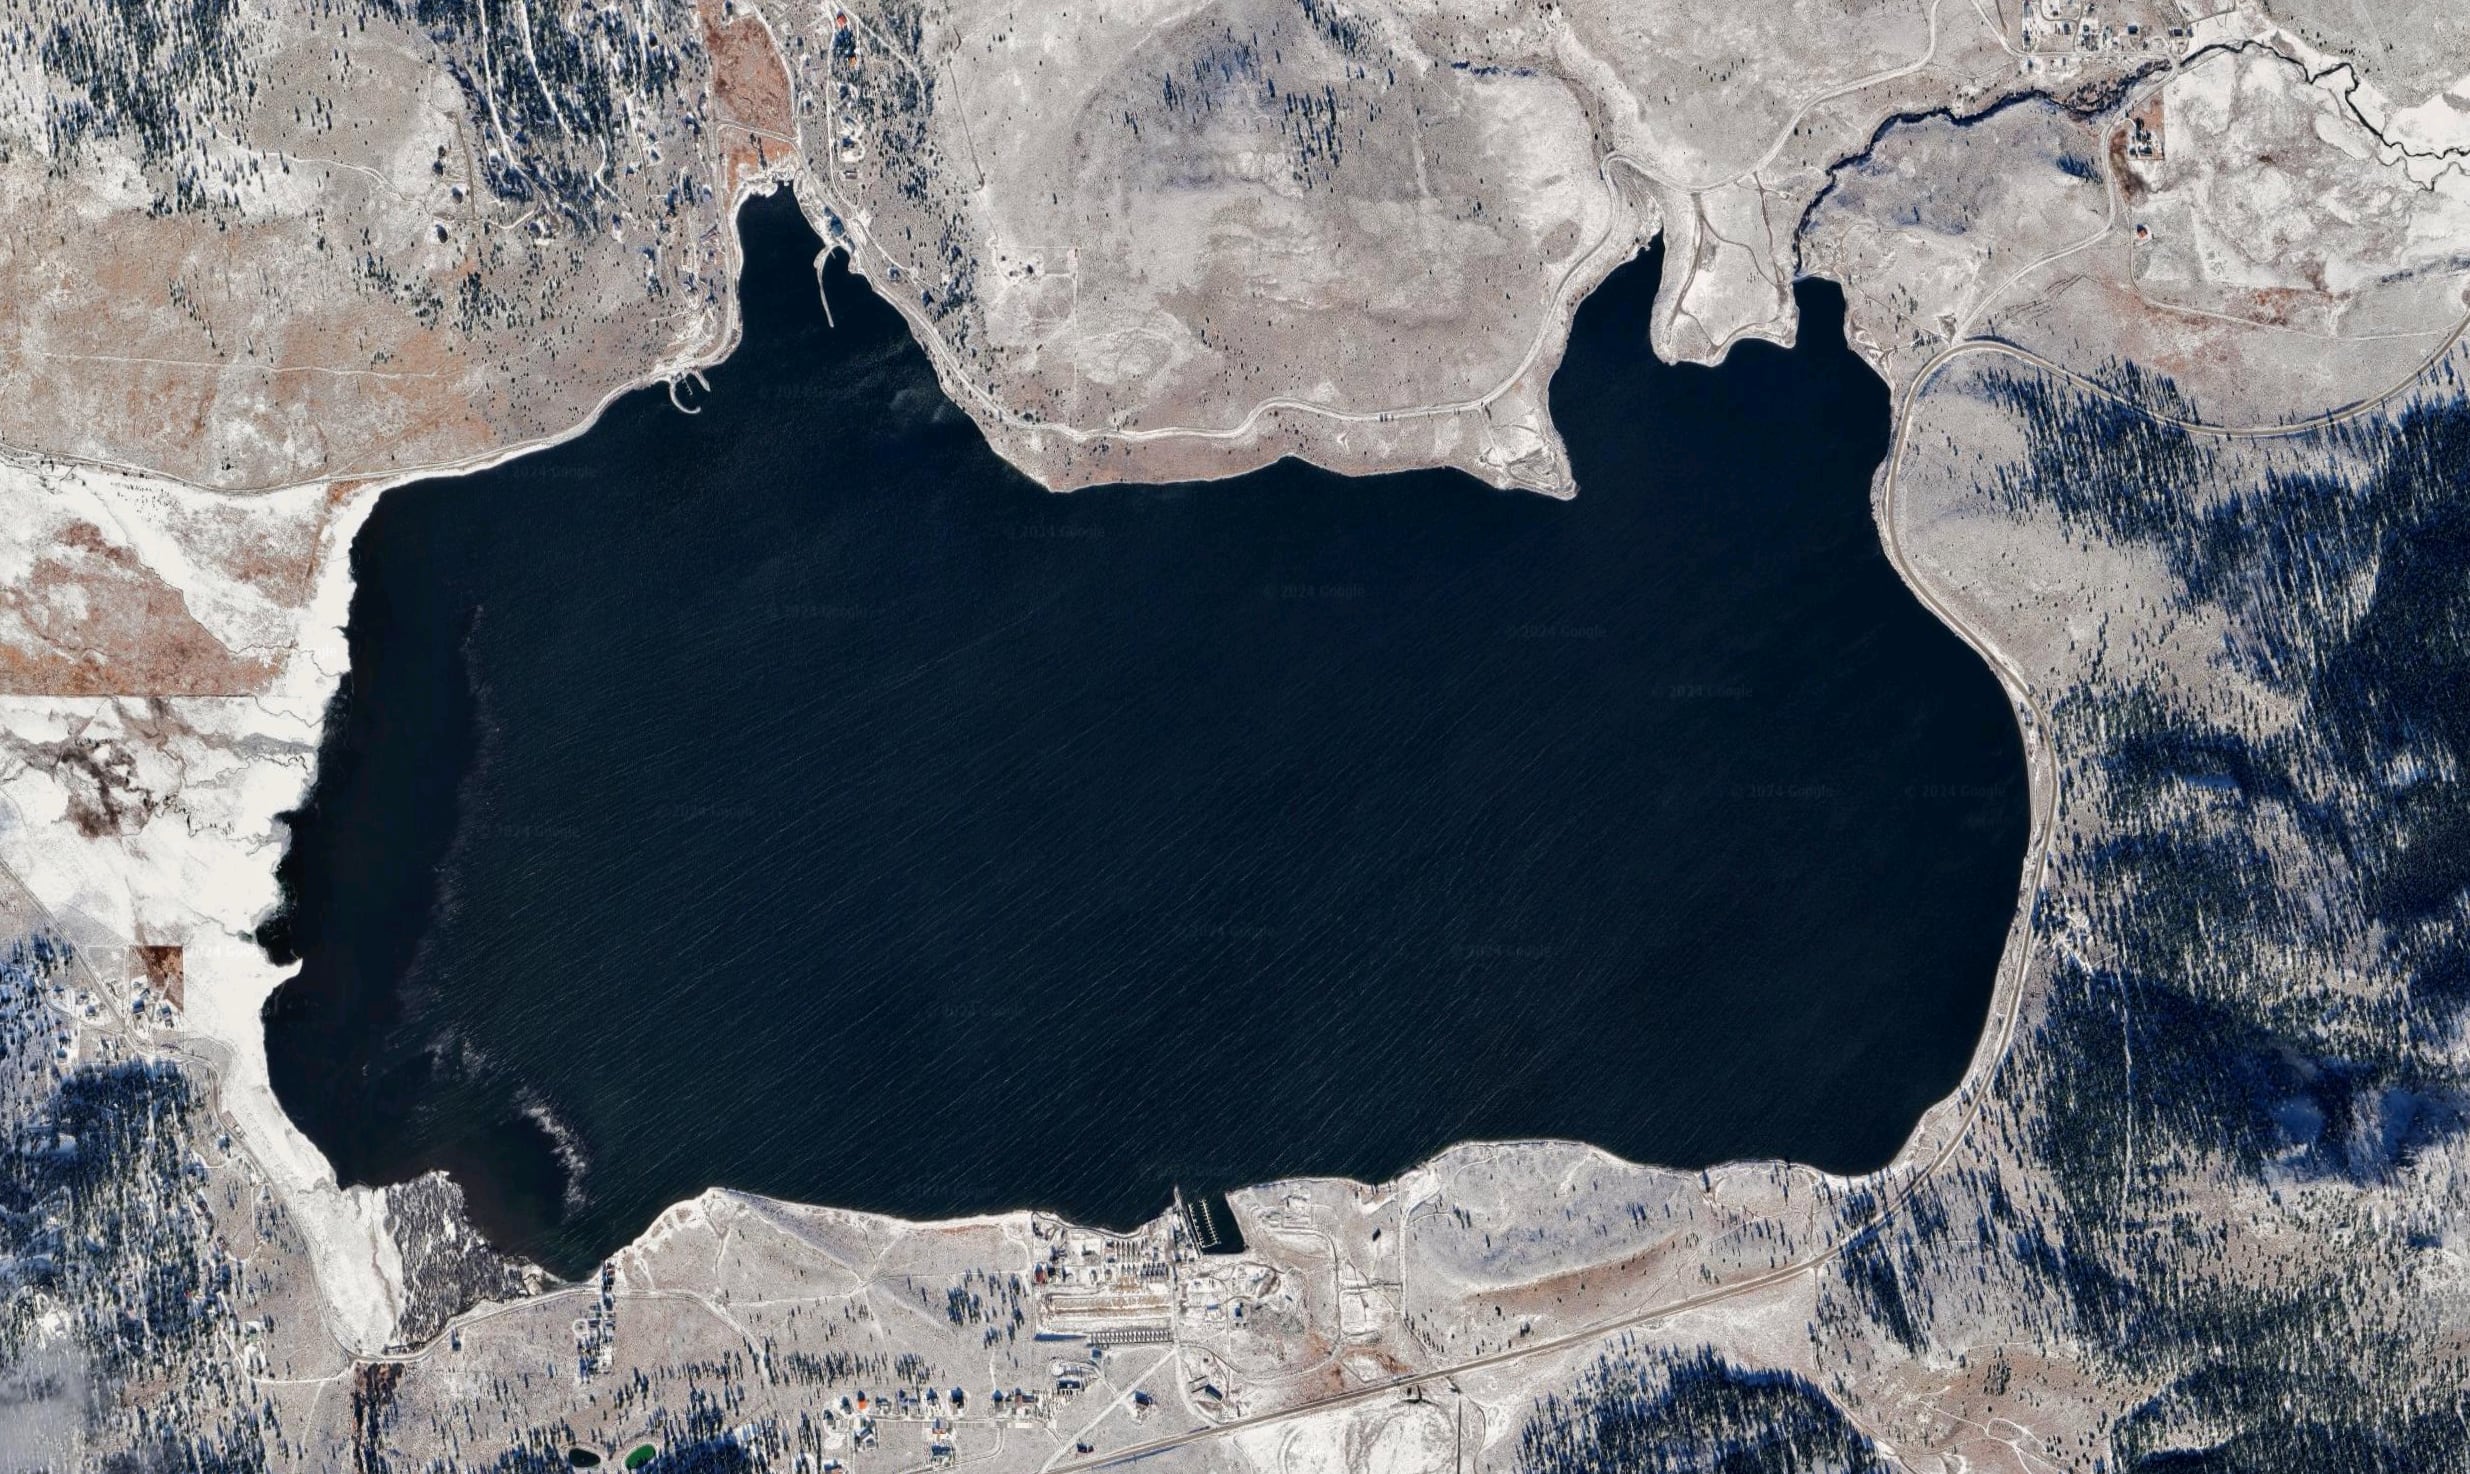 (Google Maps) The Panguitch Lake Dam, seen in the upper right corner of Panguitch Lake.